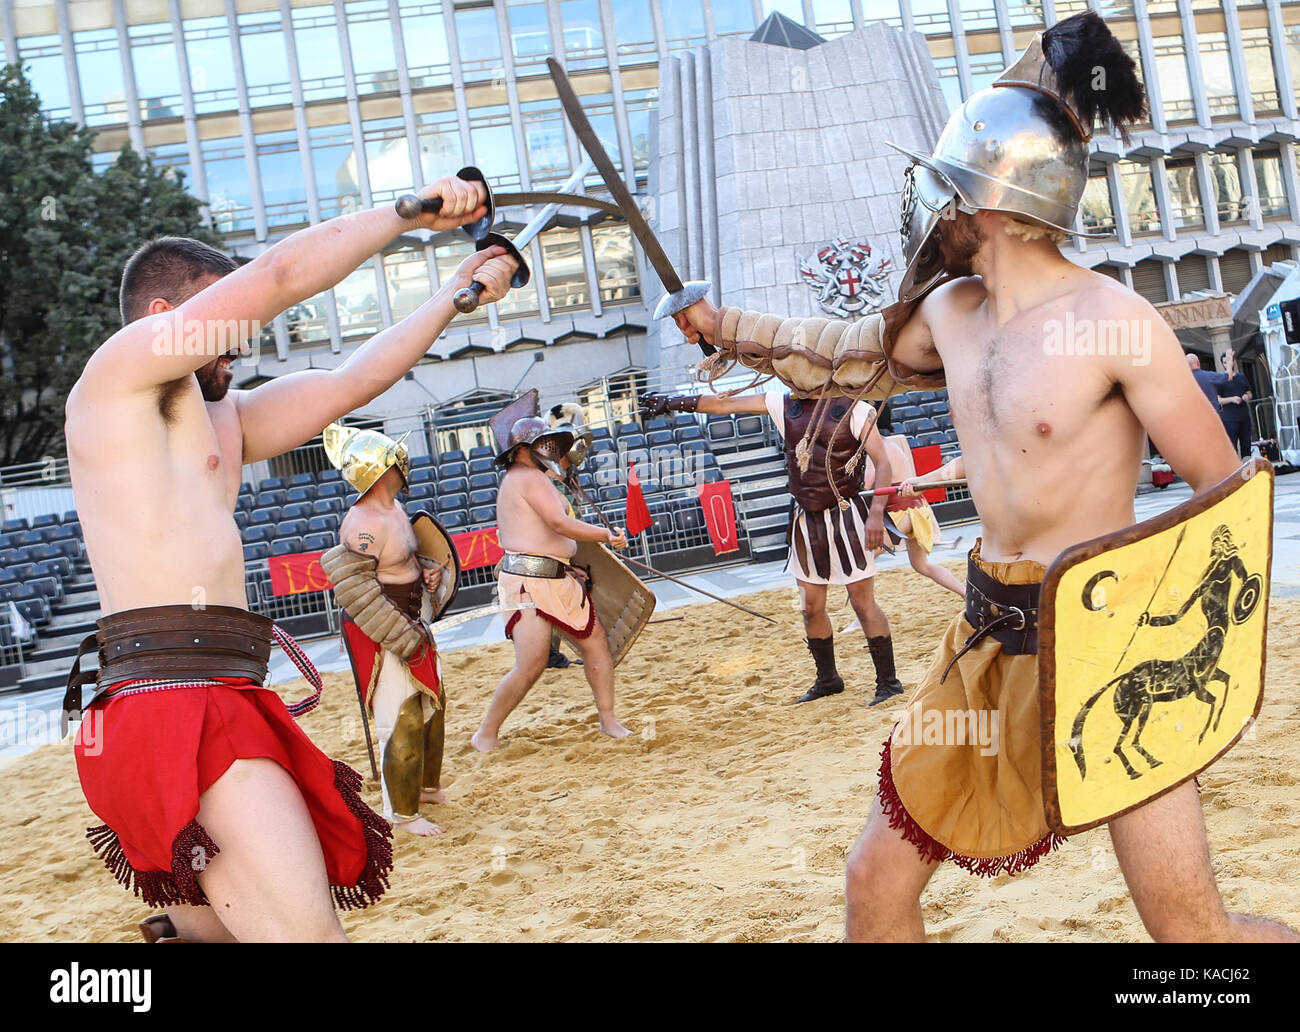 Gladiators fight it out in an epic battle of swords and shields as part of Londinium, a season of events hosted by the City of London Corporation. The Gladiator Games, staged by the Museum of London, run until Monday 29th August 2017.  Where: London, United Kingdom When: 25 Aug 2017 Credit: John Rainford/WENN.com Stock Photo